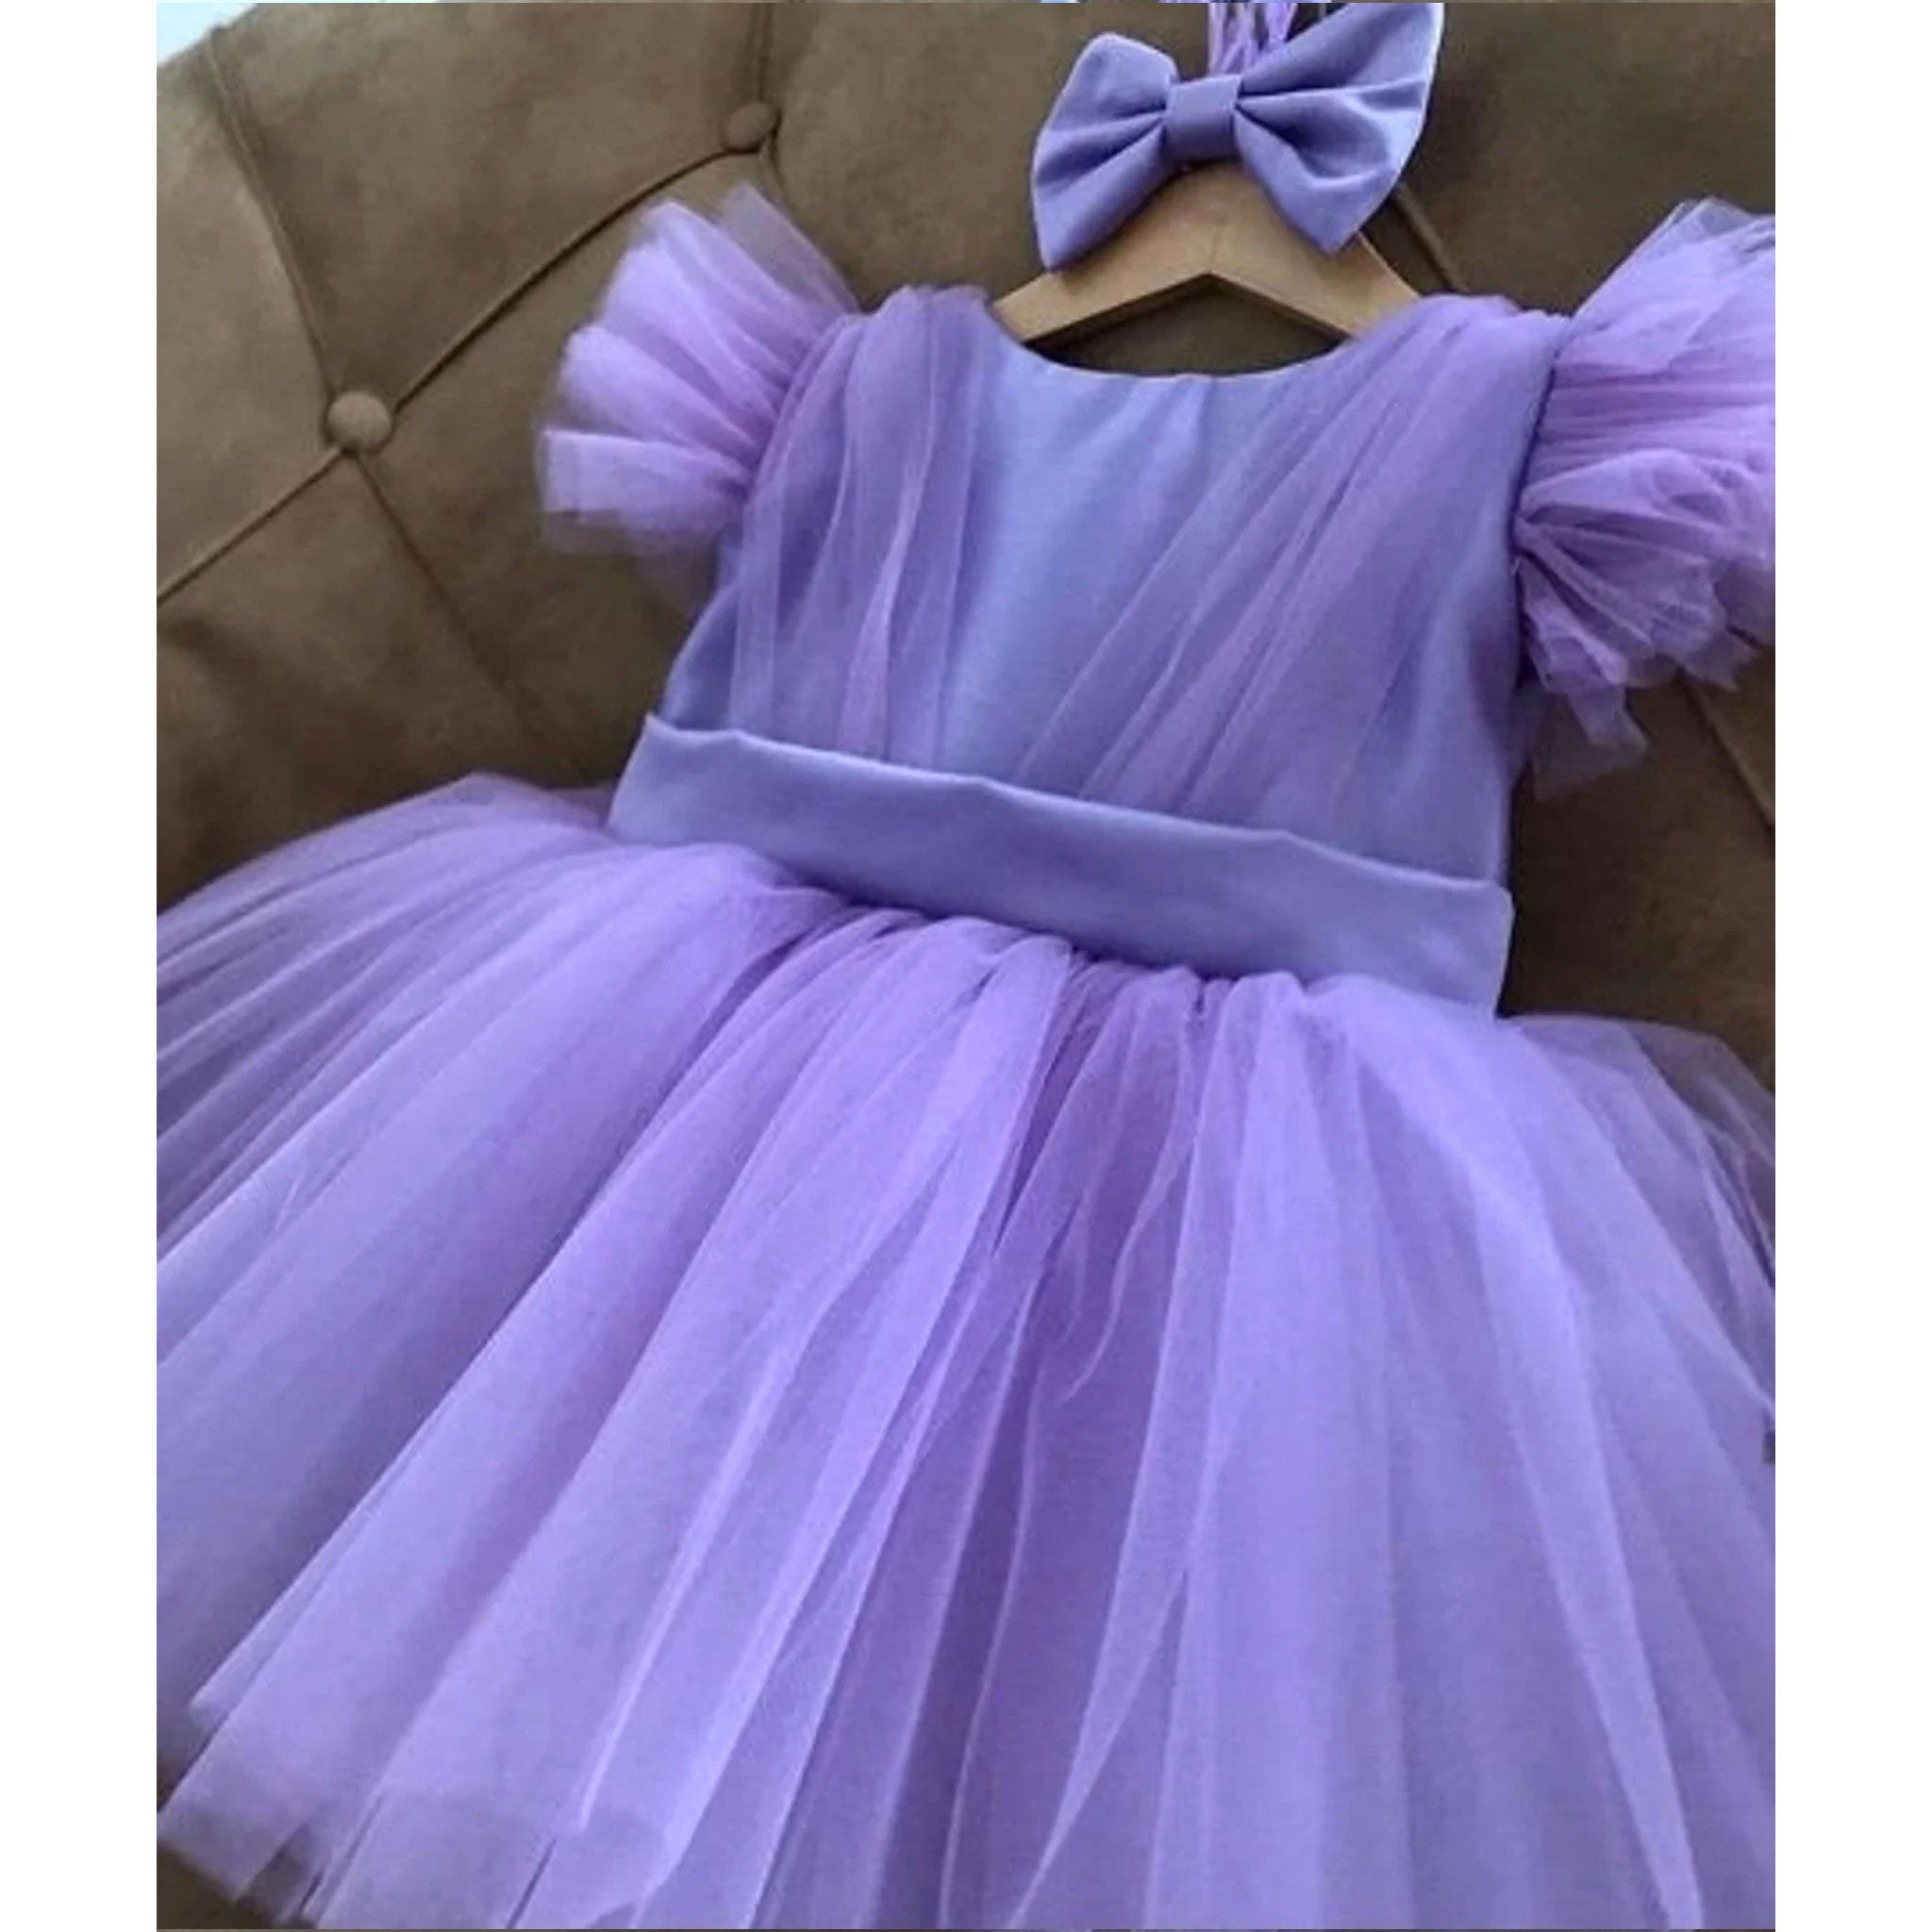 Baby Girl Dress Cute Bow Newborn Princess Dresses For Baby 1 Year Birthday  Dress Toddler Infant Party Dress Christening Gown - Dresses - AliExpress